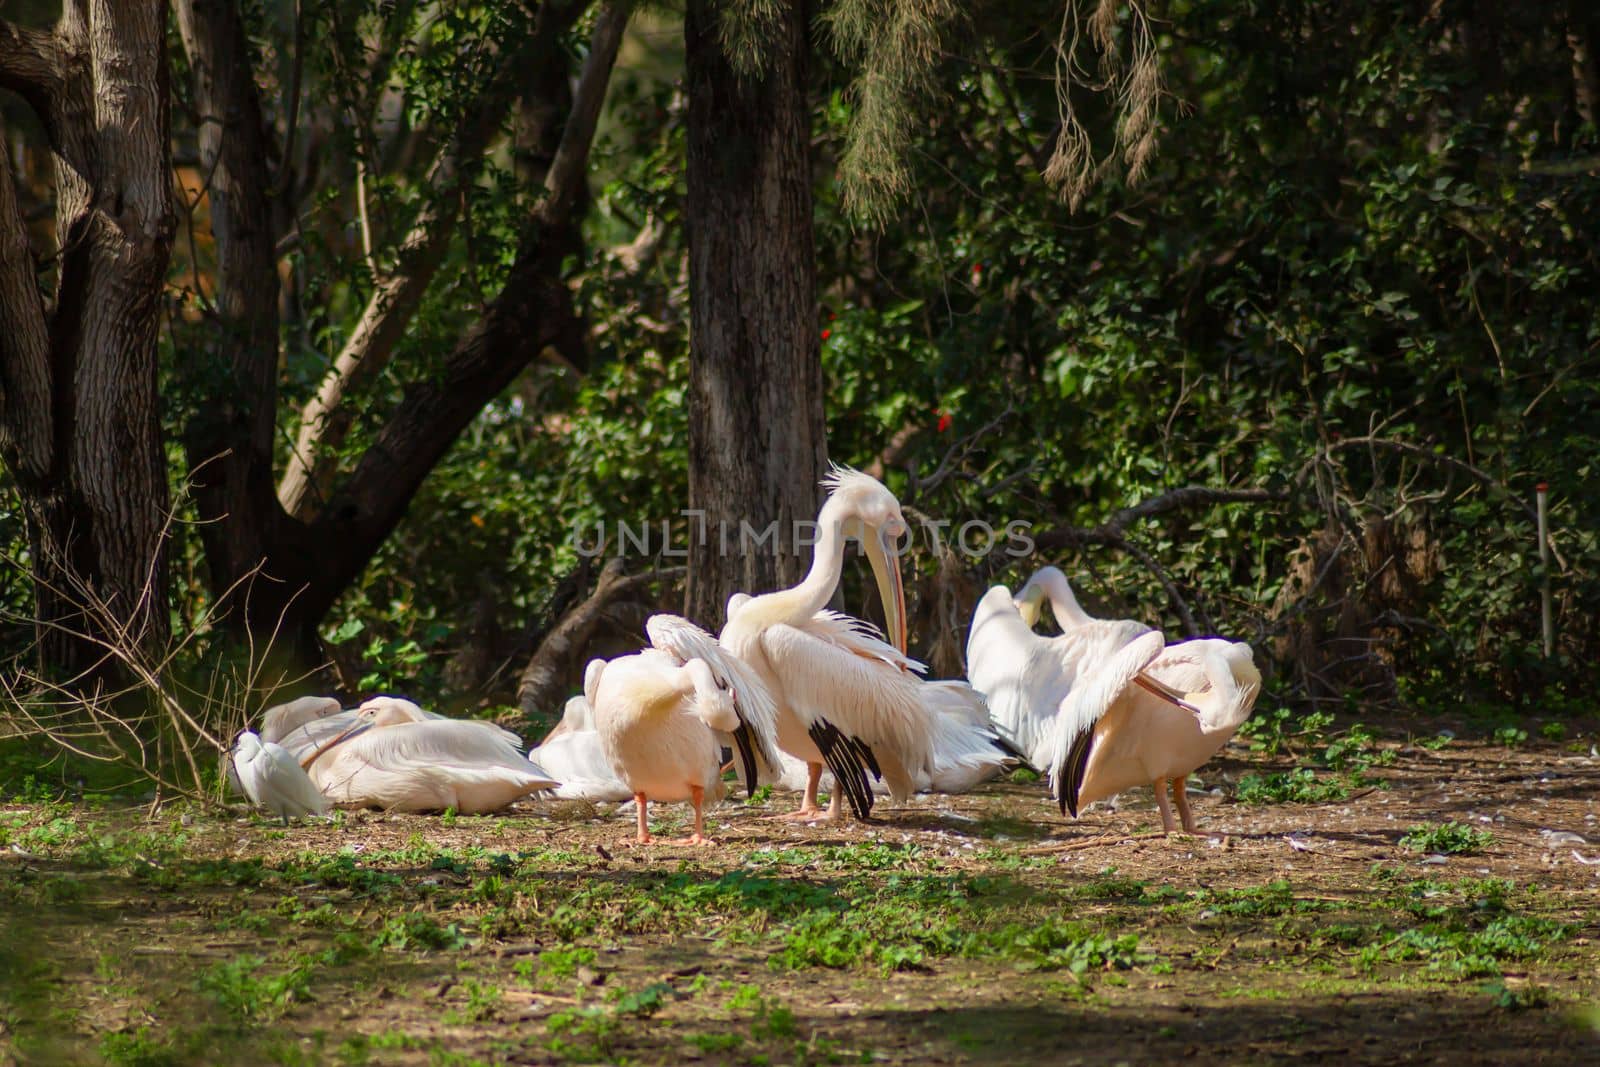 A flock of pelicans resting in the meadow.